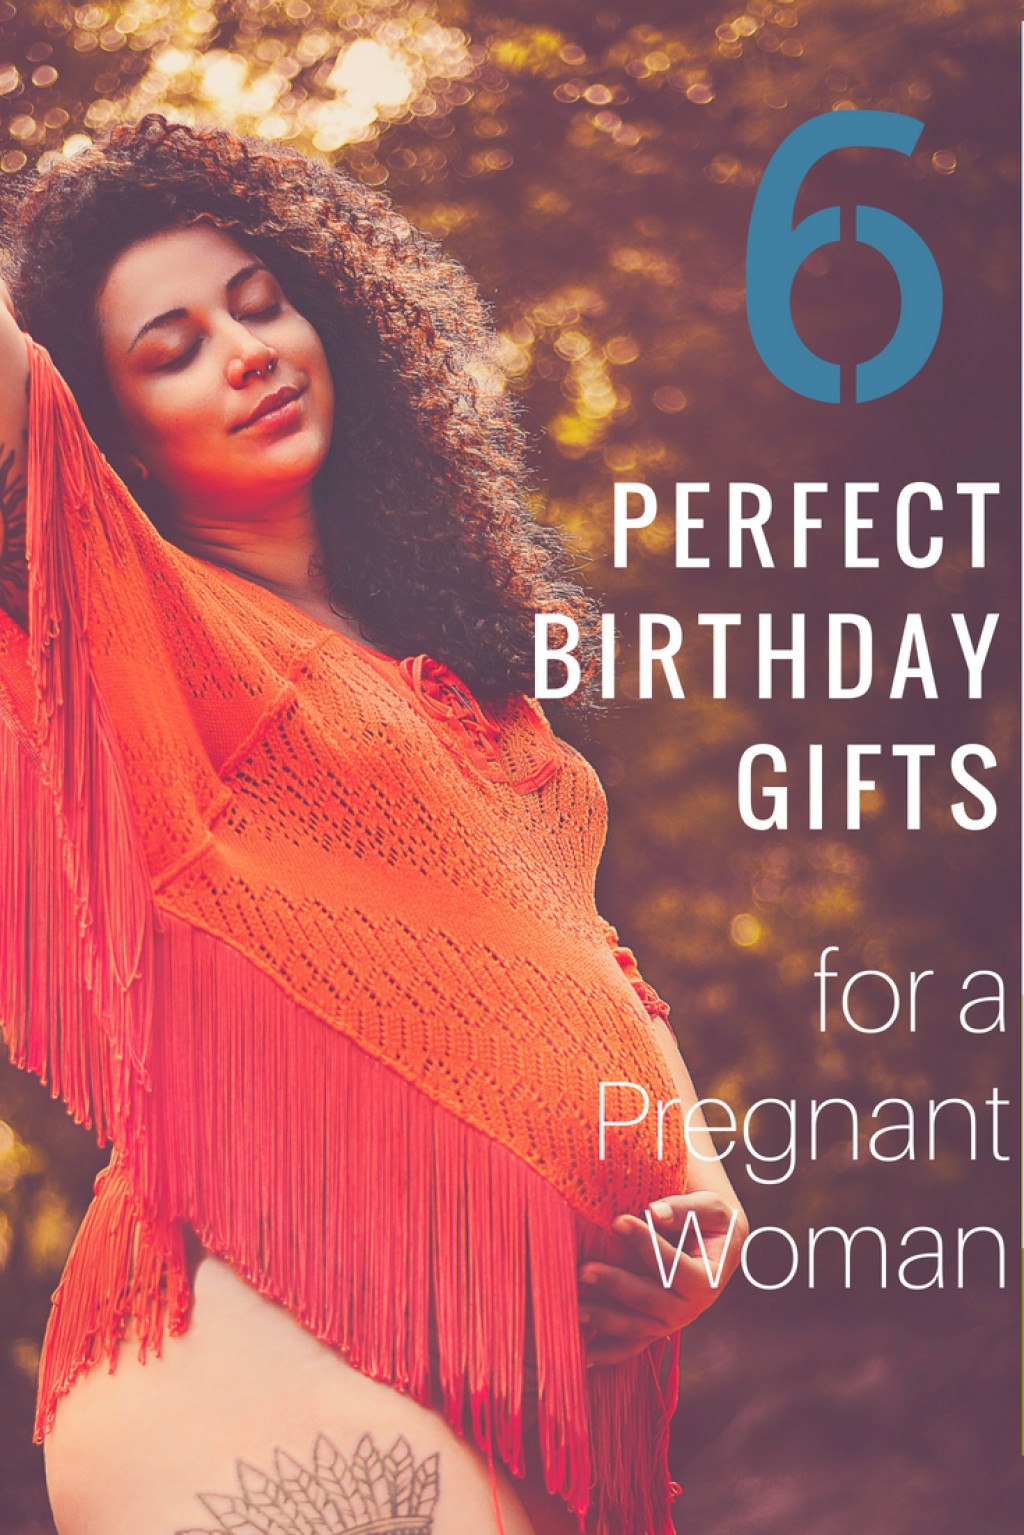 Wife Birthday Gifts
 6 Perfect Birthday Gifts for Your Pregnant Wife